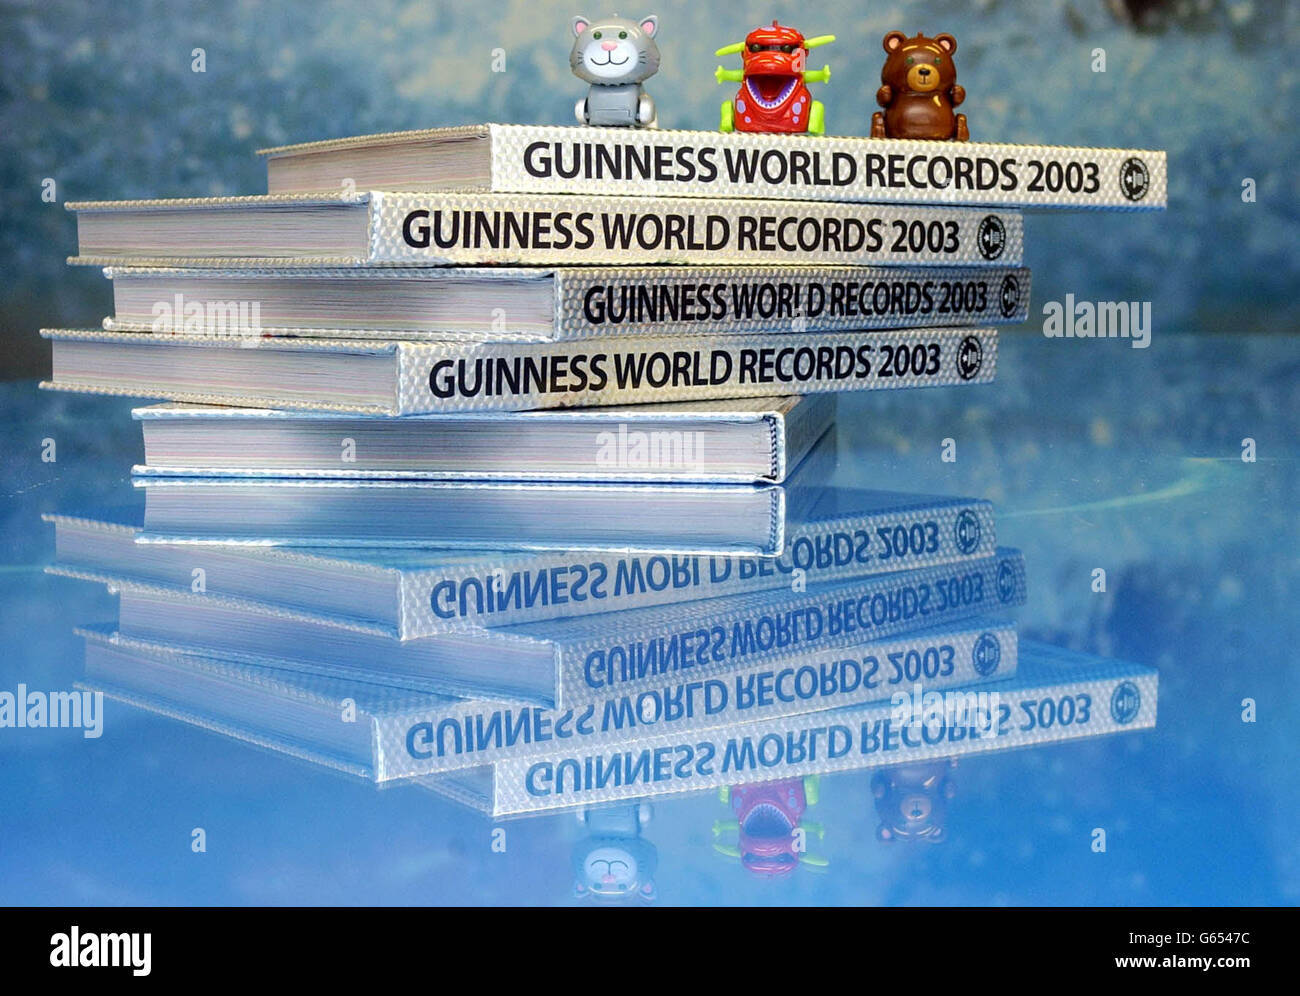 Some of the original micro pets (from left) Chumsley, Yuk and Kuma, sit on top of copies of the Guinness Book of Records in central London, after the Tomy toys were officially awarded a Guinness World Record for the Worlds's Smallest Self-Powered Sound-Activated Toy. * The toys respond to both voice commands and hand clapping sequences. Stock Photo